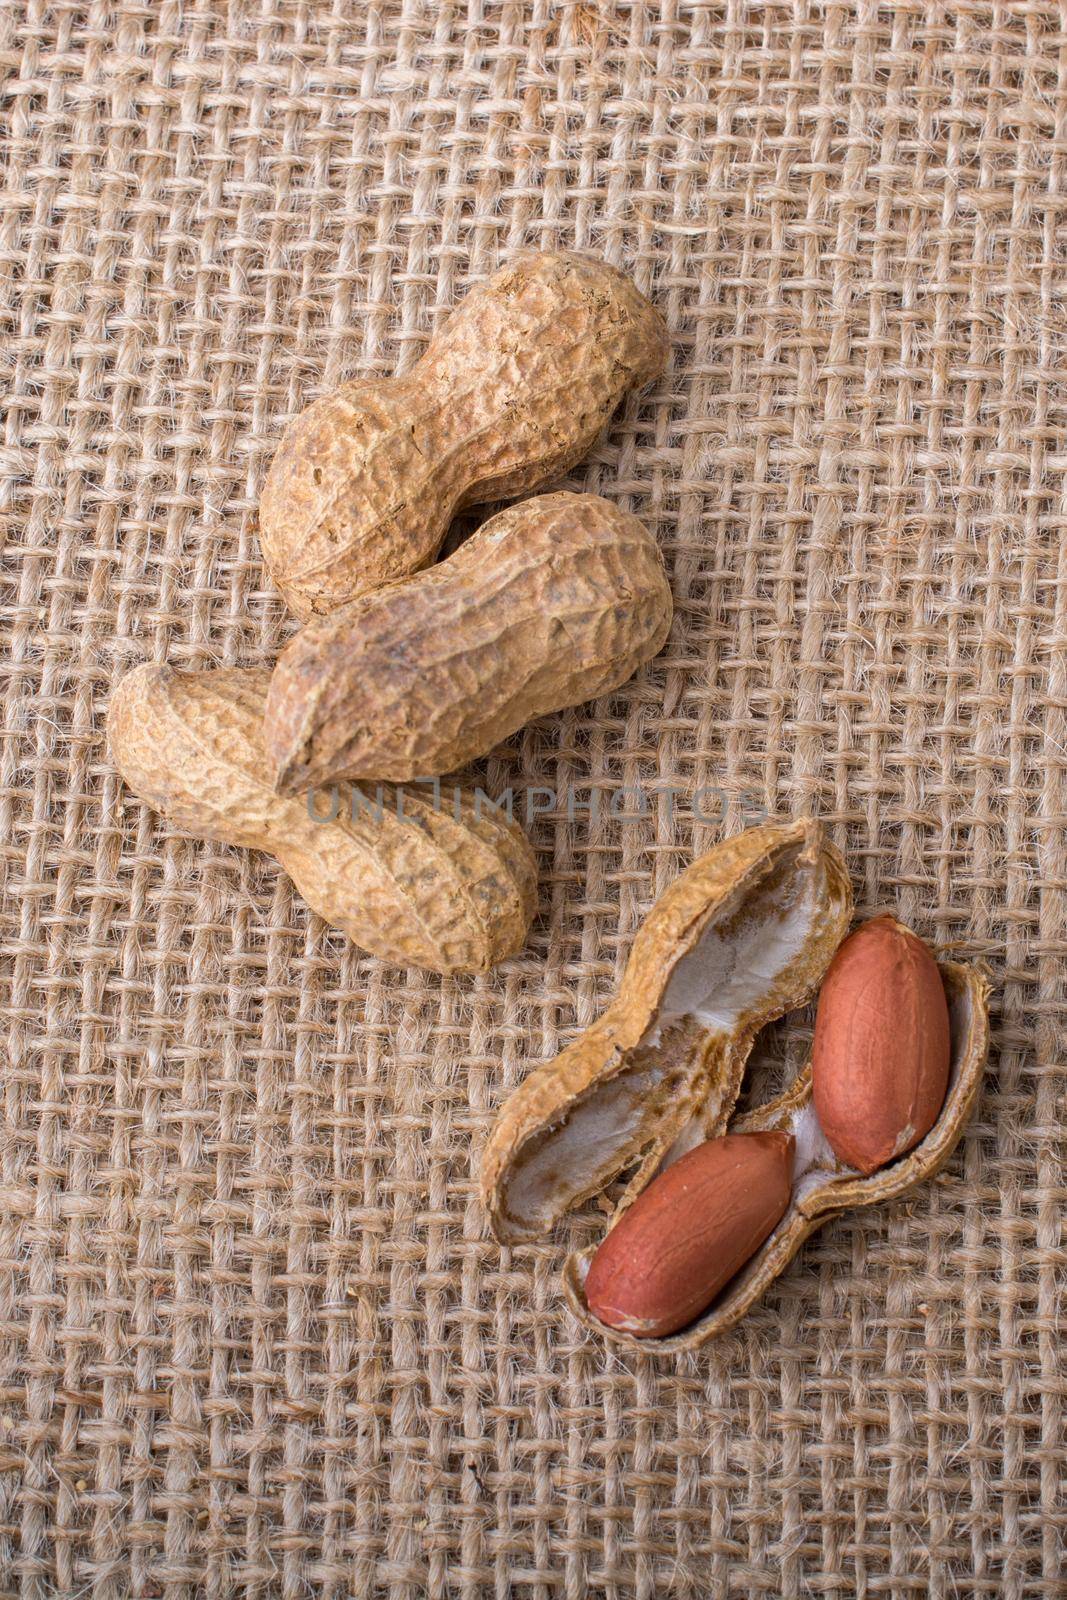 Cracked open peanuts with shell on a linen canvas  by berkay